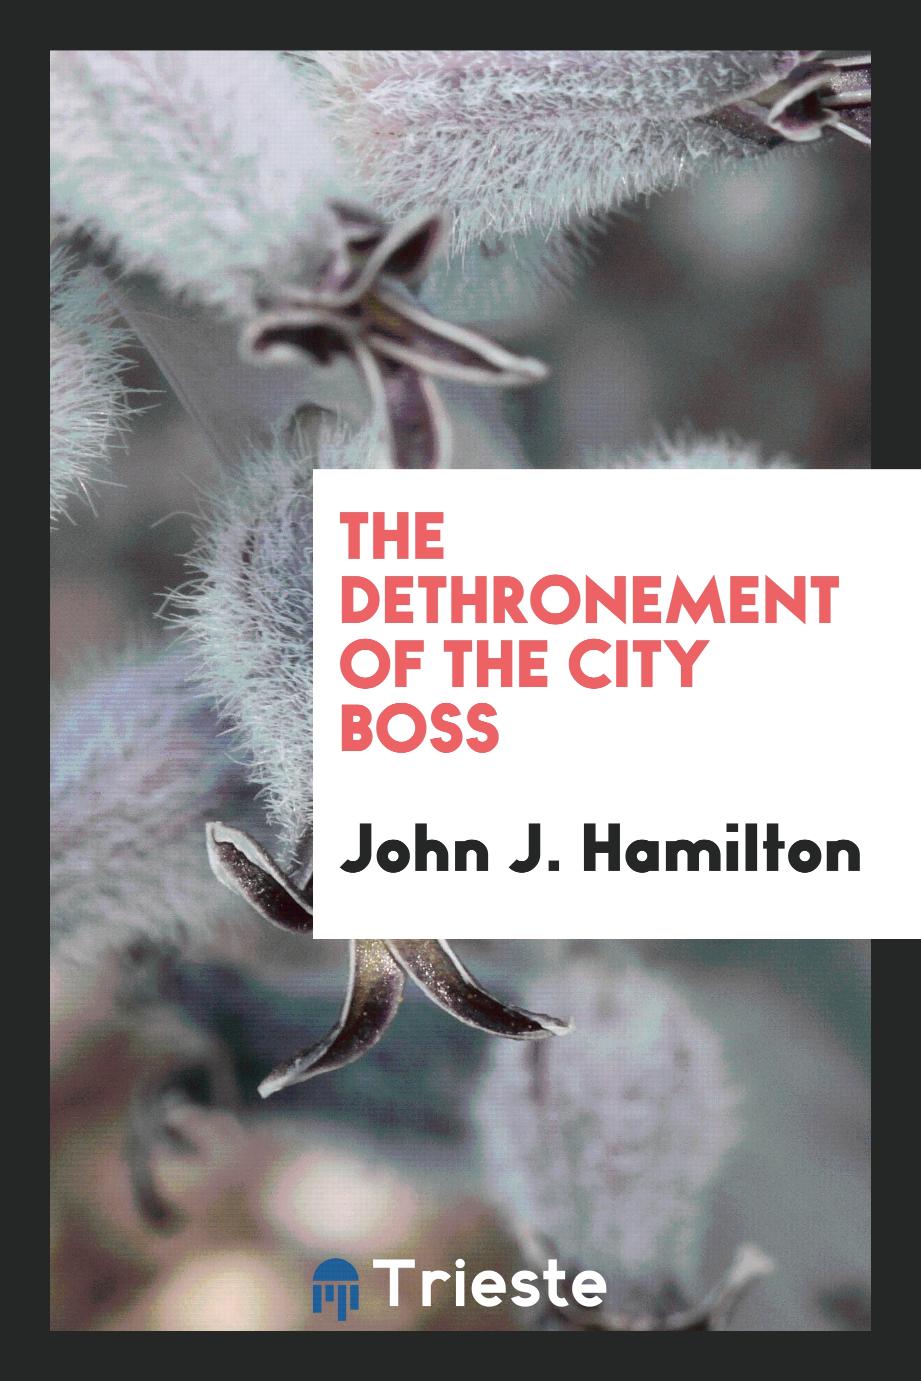 The dethronement of the city boss